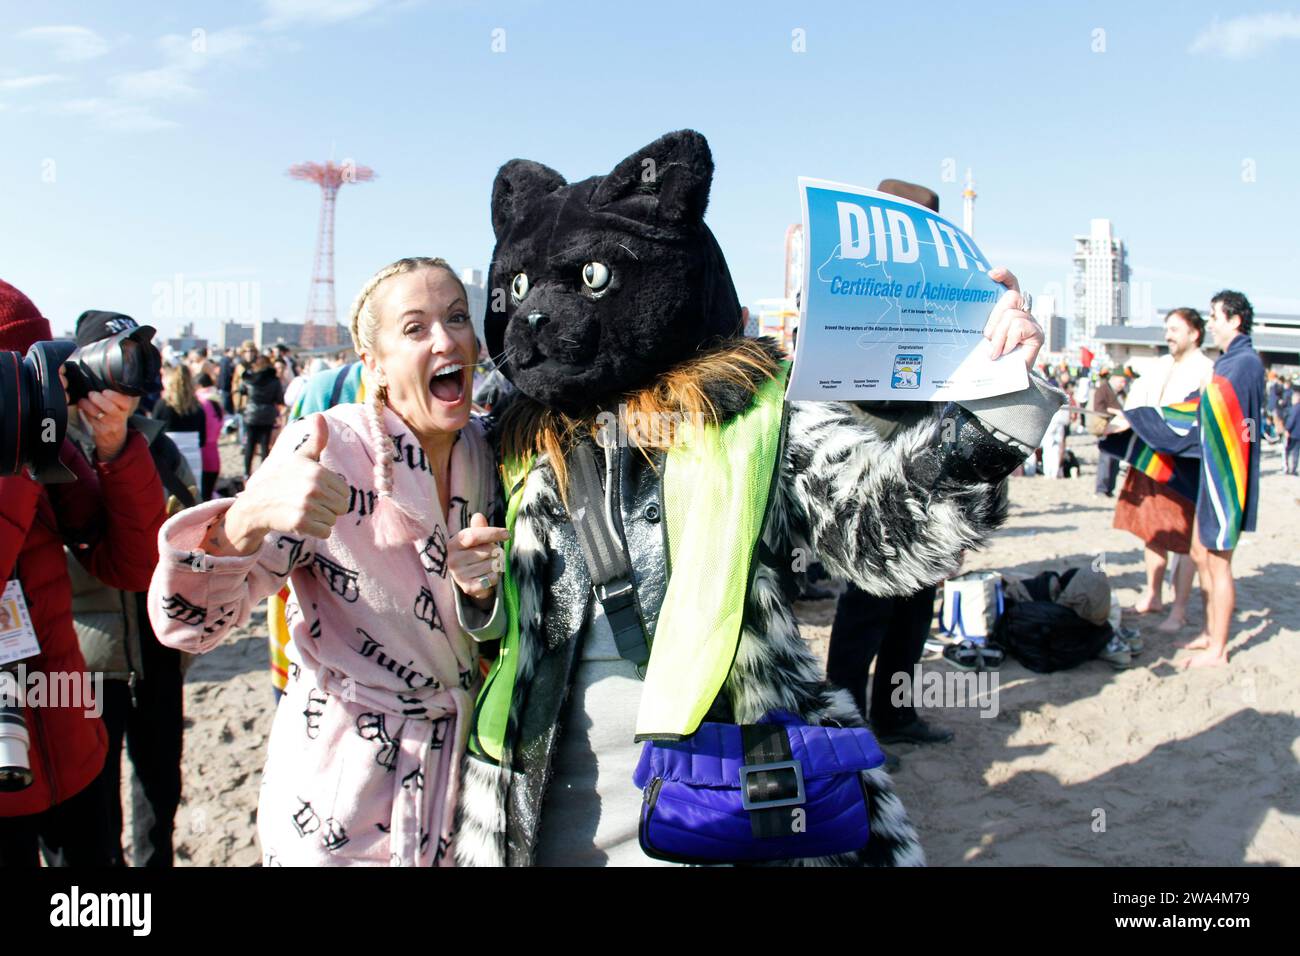 New York, United States. 01st Jan, 2024. Swimmers are taking part in the annual New Year's Day ''polar bear plunge'' at Coney Island Beach in New York, on January 1, 2023. The 121st annual Coney Island Polar Bear Club New Year's Day Plunge is drawing over 4000 participants who are braving the freezing Atlantic waters. The event, which began in 1903, is raising funds to support local non-profit organizations in the southernmost tip of Brooklyn, New York. (Photo by Deccio Serrano/NurPhoto)0 Credit: NurPhoto SRL/Alamy Live News Stock Photo